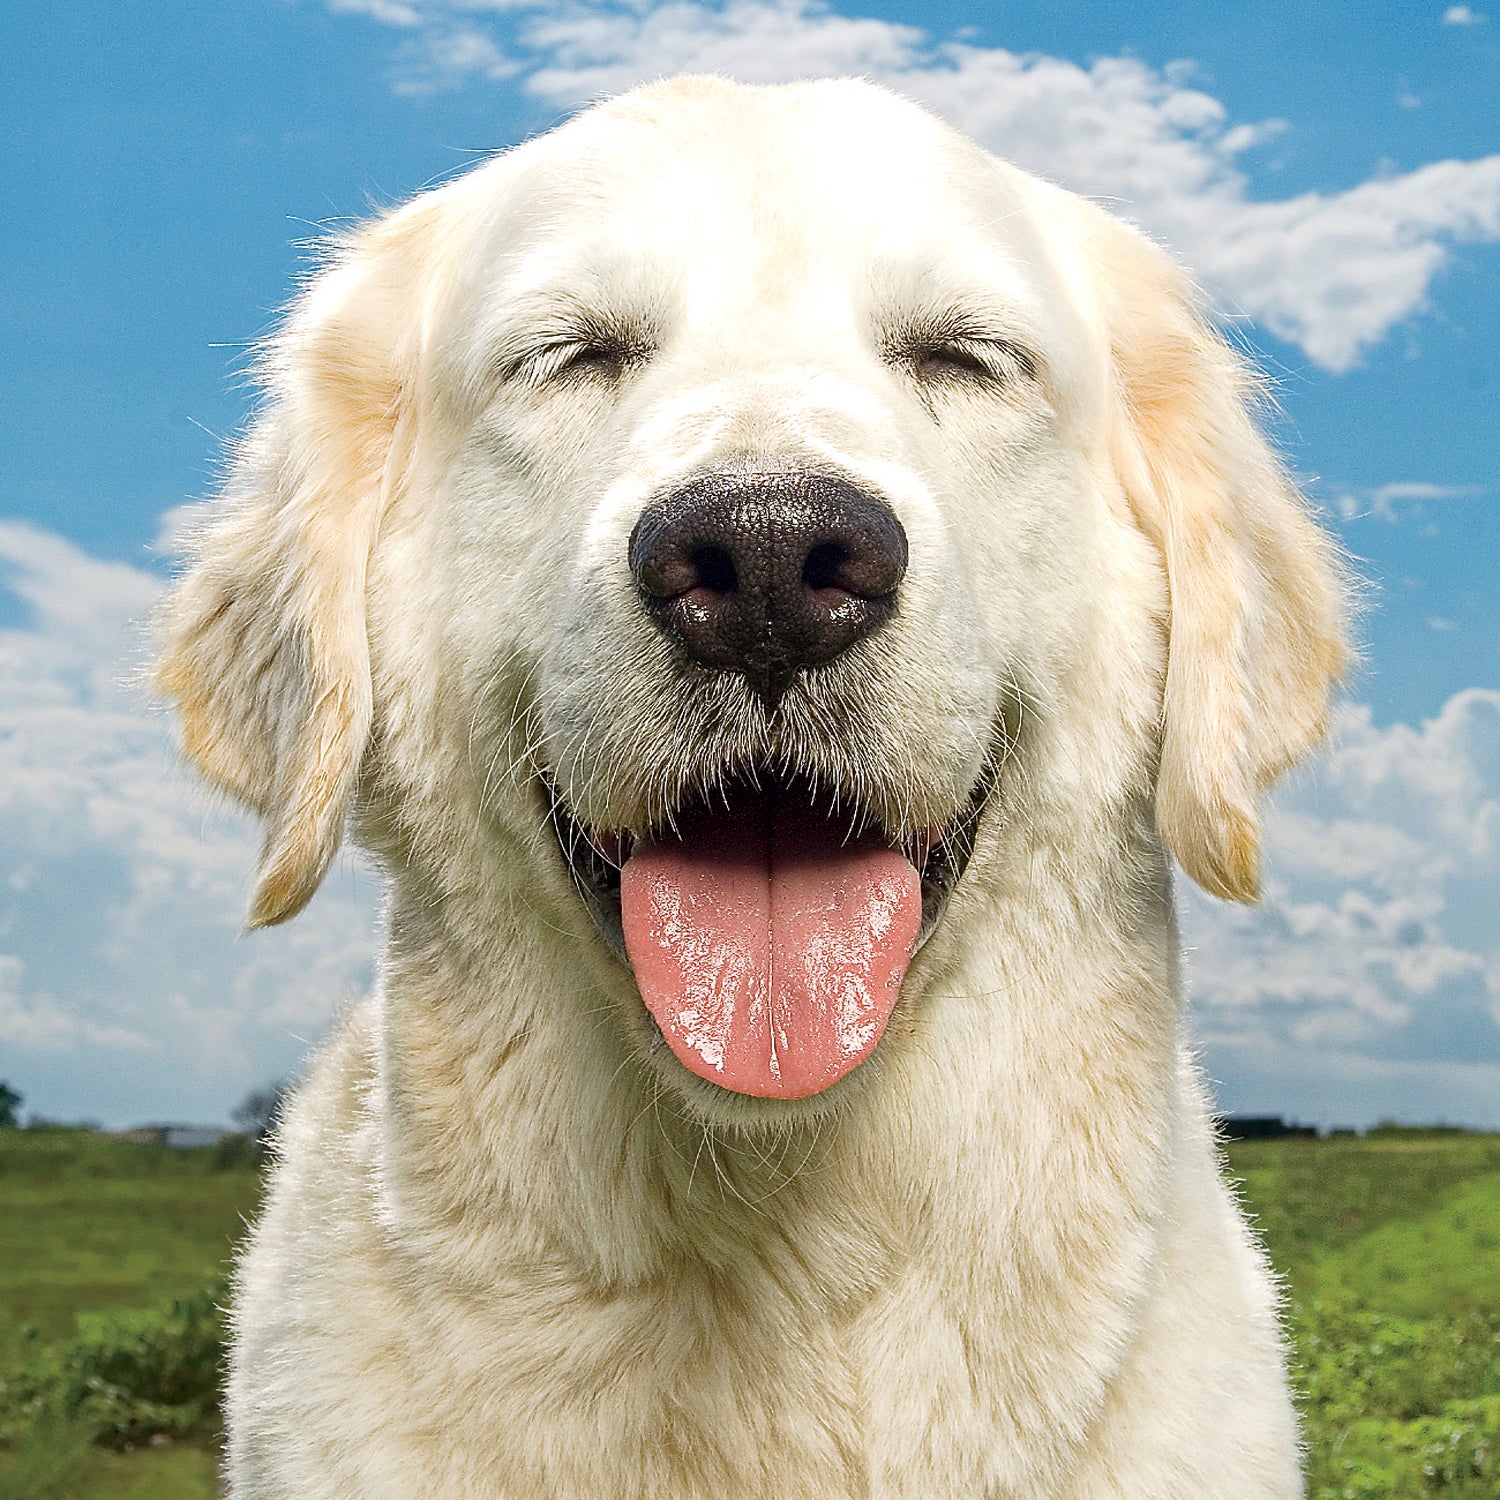 do dogs know when we laugh